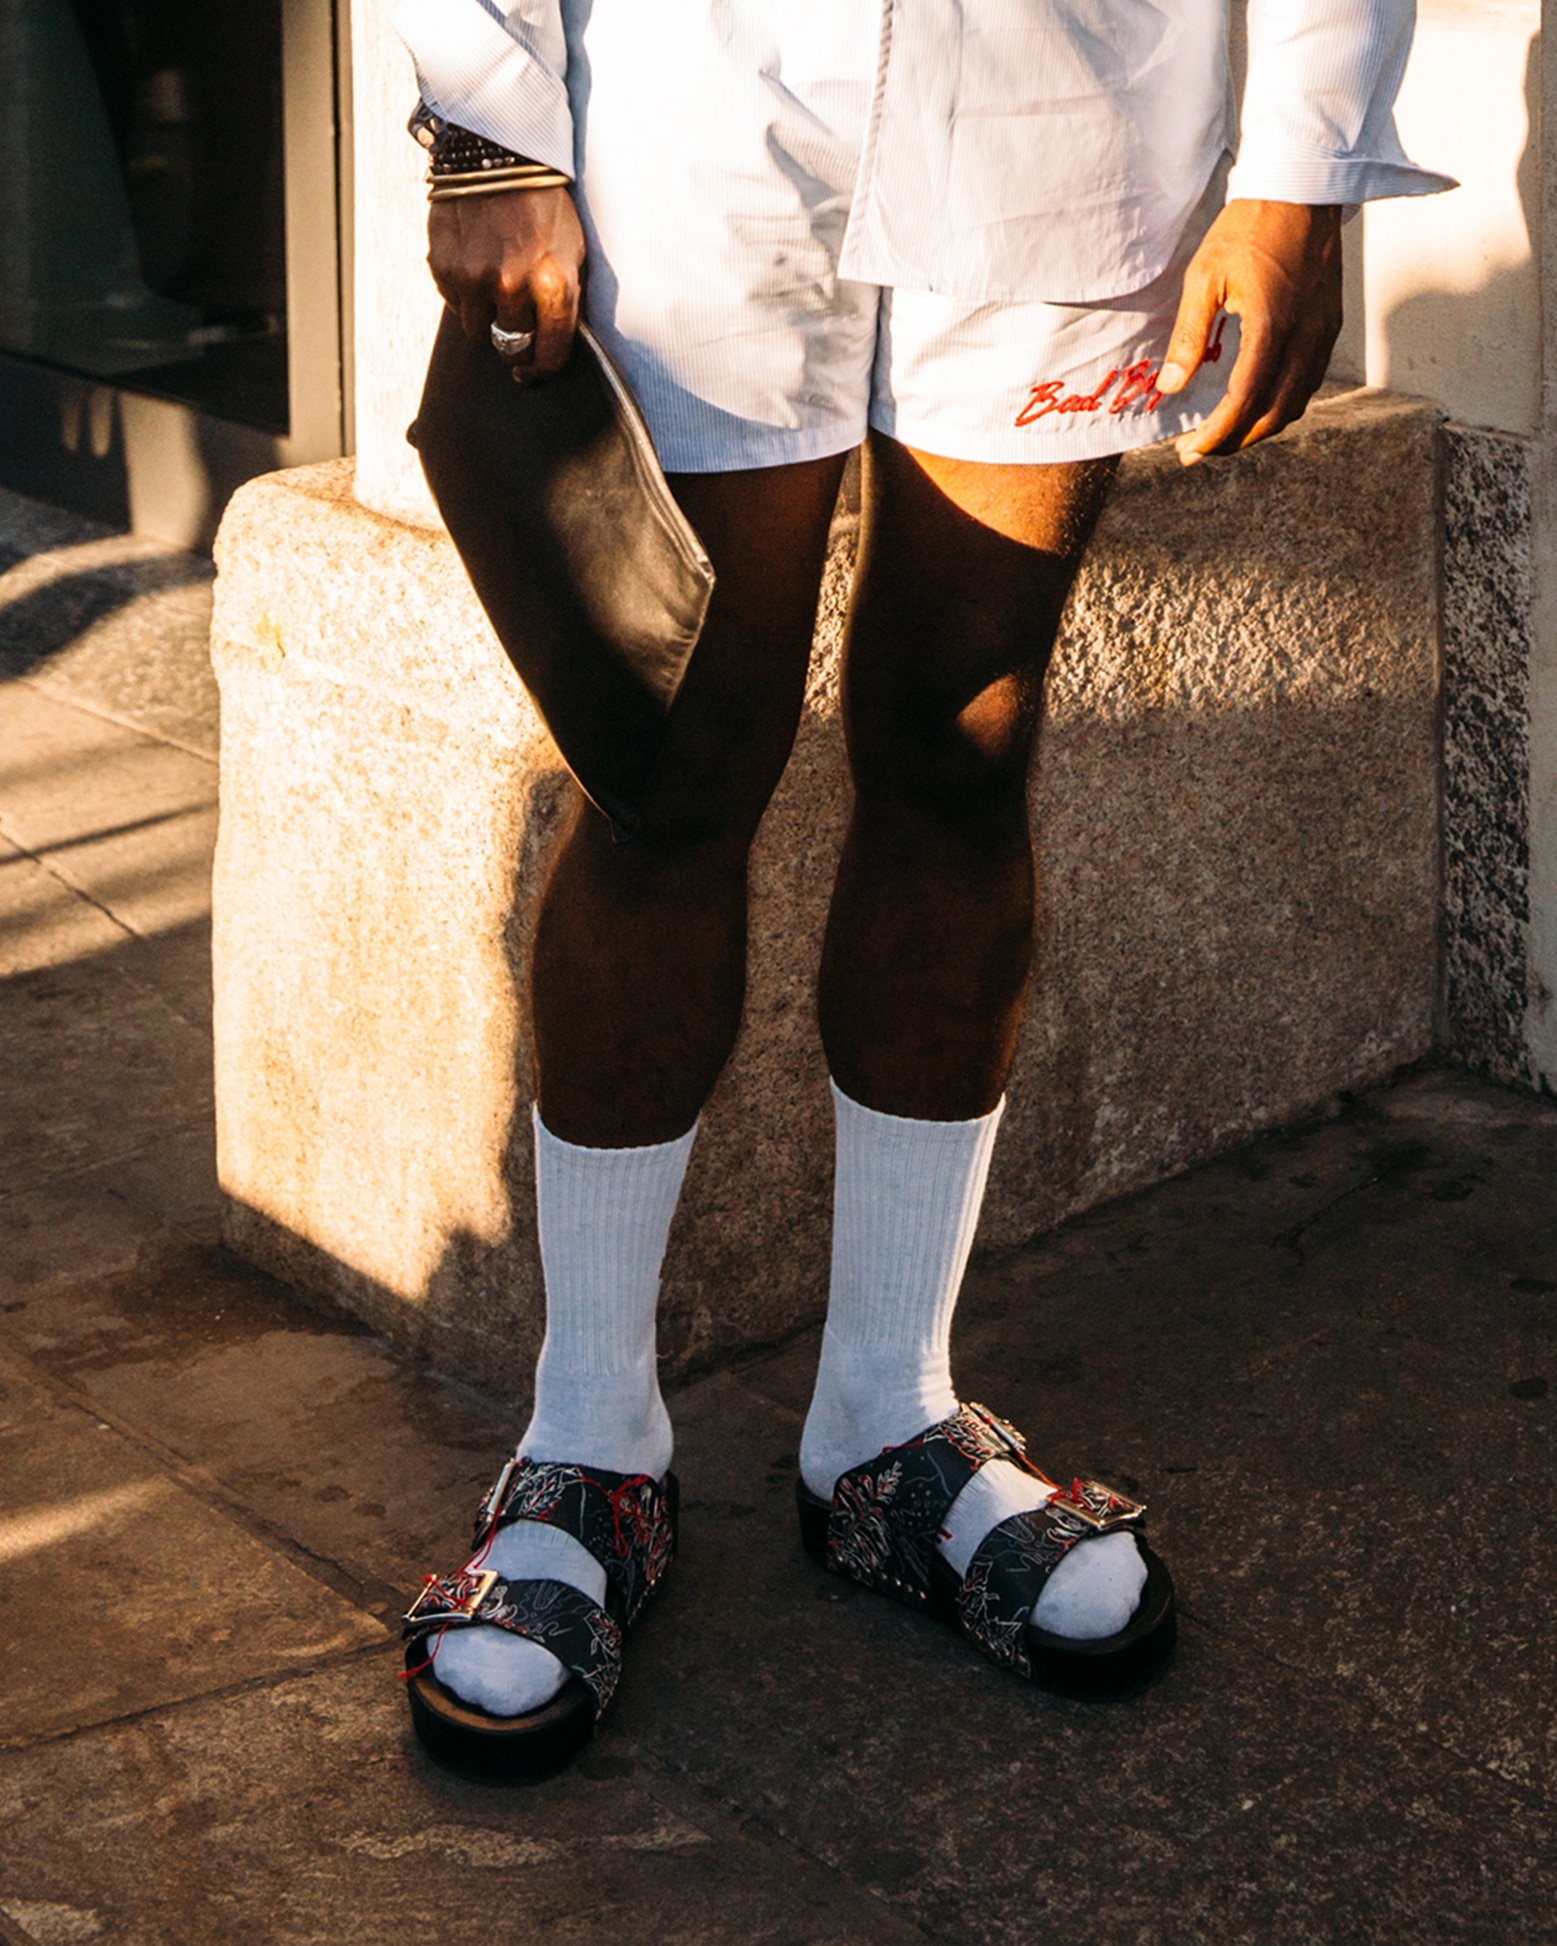 Daisy Ecology Unconscious The Stylish Gent's Guide To Wearing Socks And Sandals | The Journal | MR  PORTER